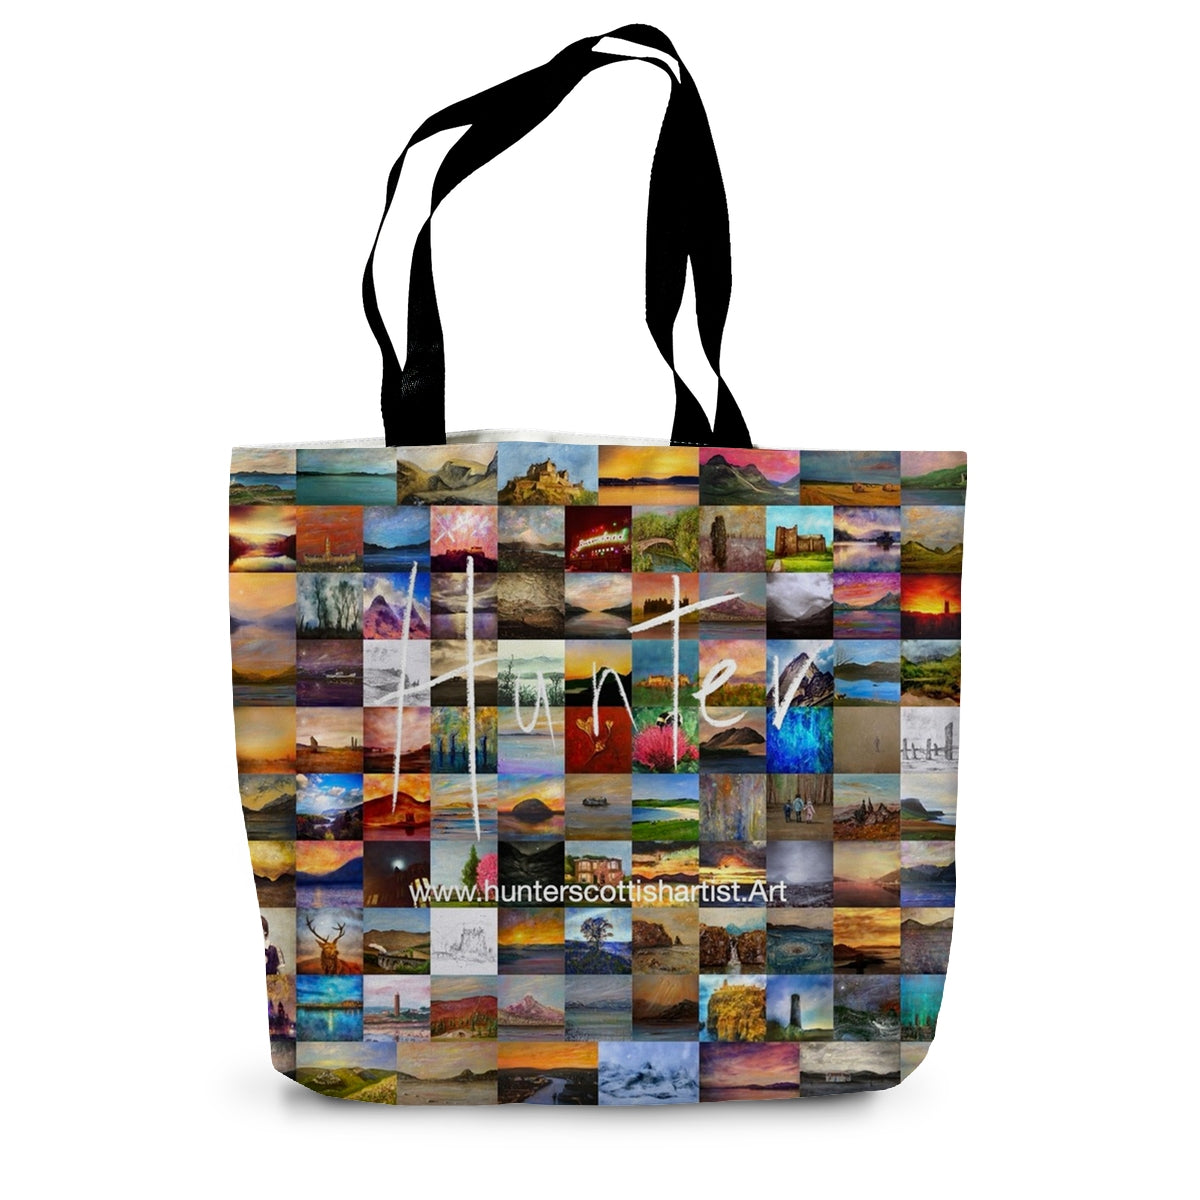 A Clyde Summer Day Art Gifts Canvas Tote Bag-Bags-River Clyde Art Gallery-14"x18.5"-Paintings, Prints, Homeware, Art Gifts From Scotland By Scottish Artist Kevin Hunter